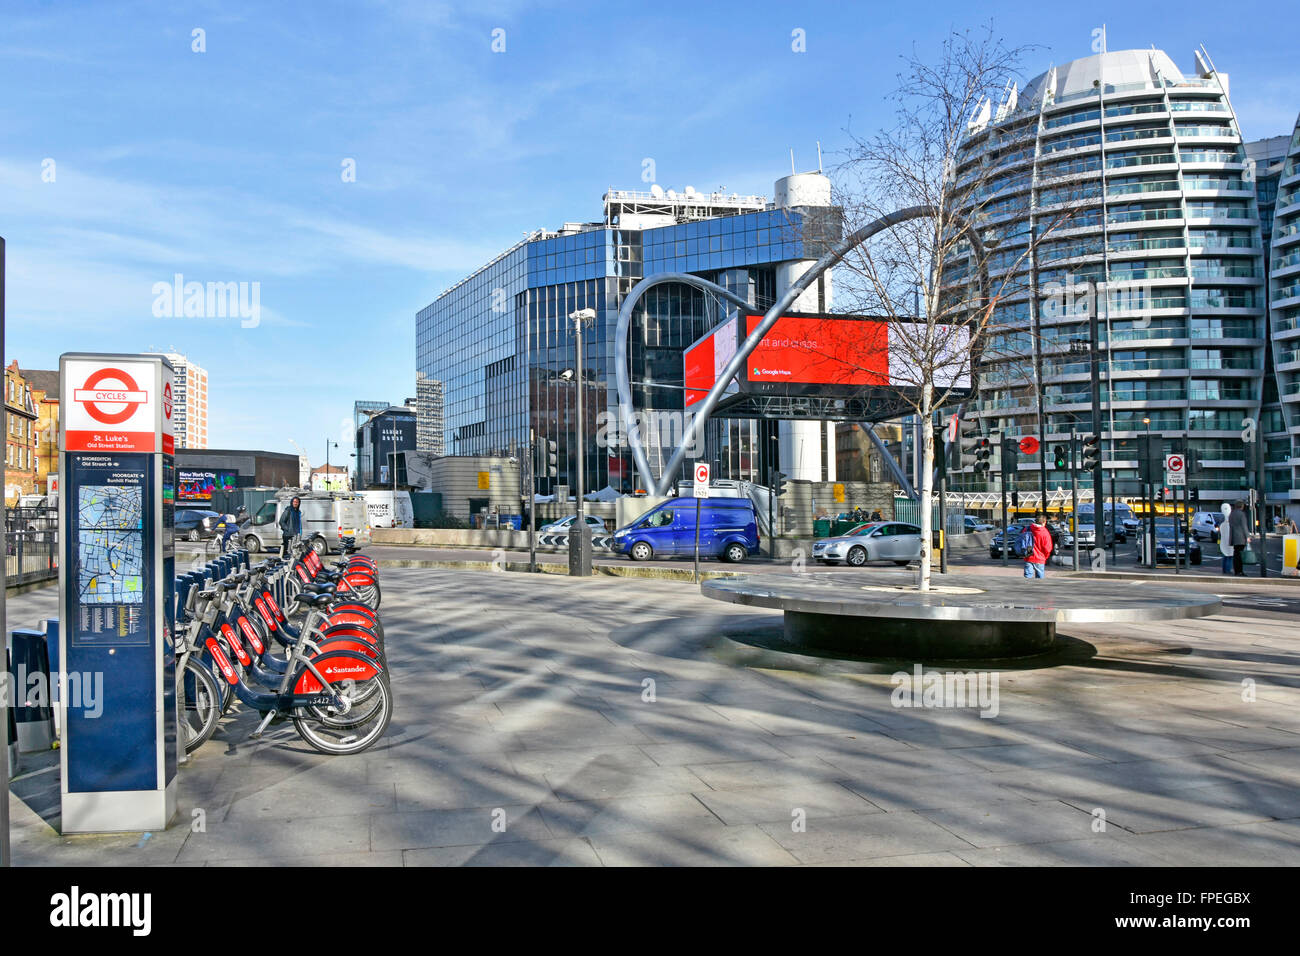 Old Street Roundabout junction of Old Street & City Road adjacent areas referred to as Silicon Roundabout or Tech City Santander bike hire docking UK Stock Photo